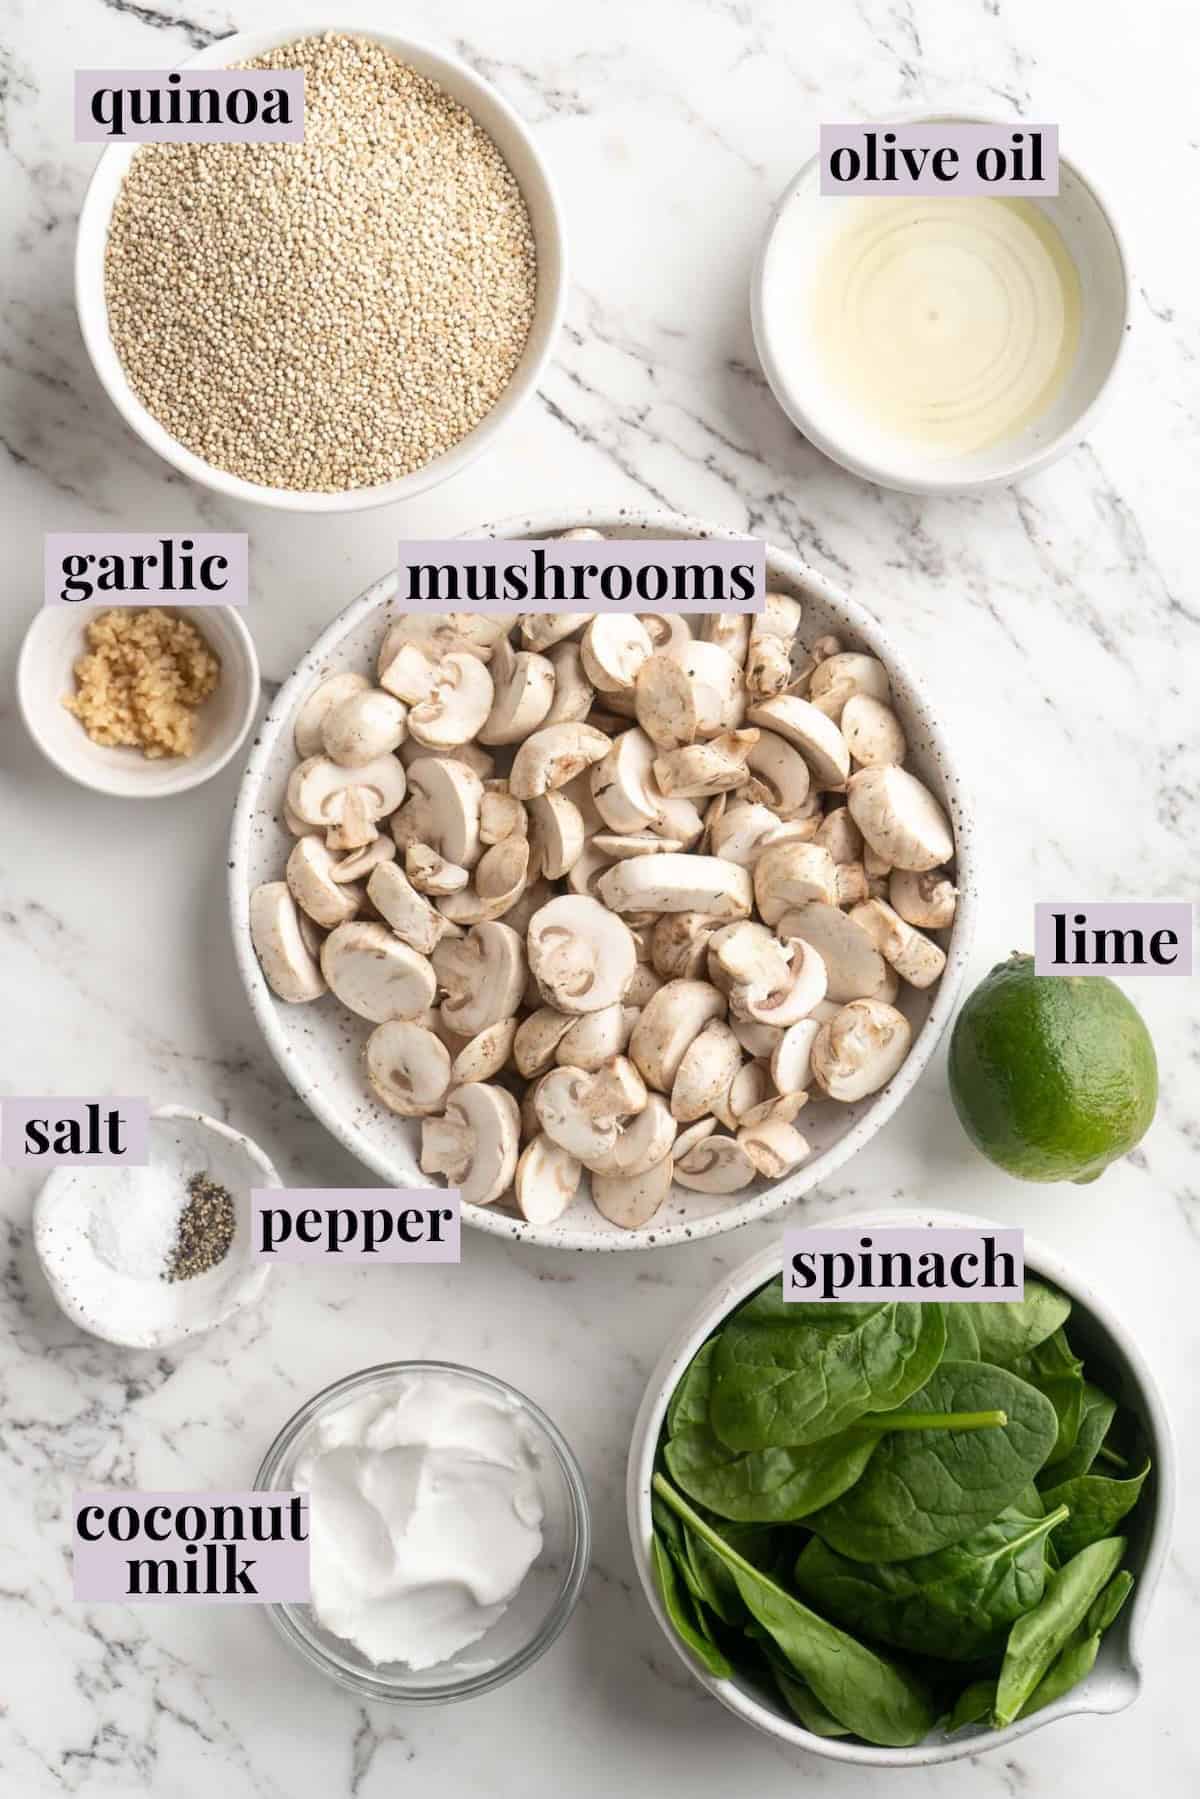 Overhead view of ingredients for coconut creamy spinach and mushroom quinoa with labels